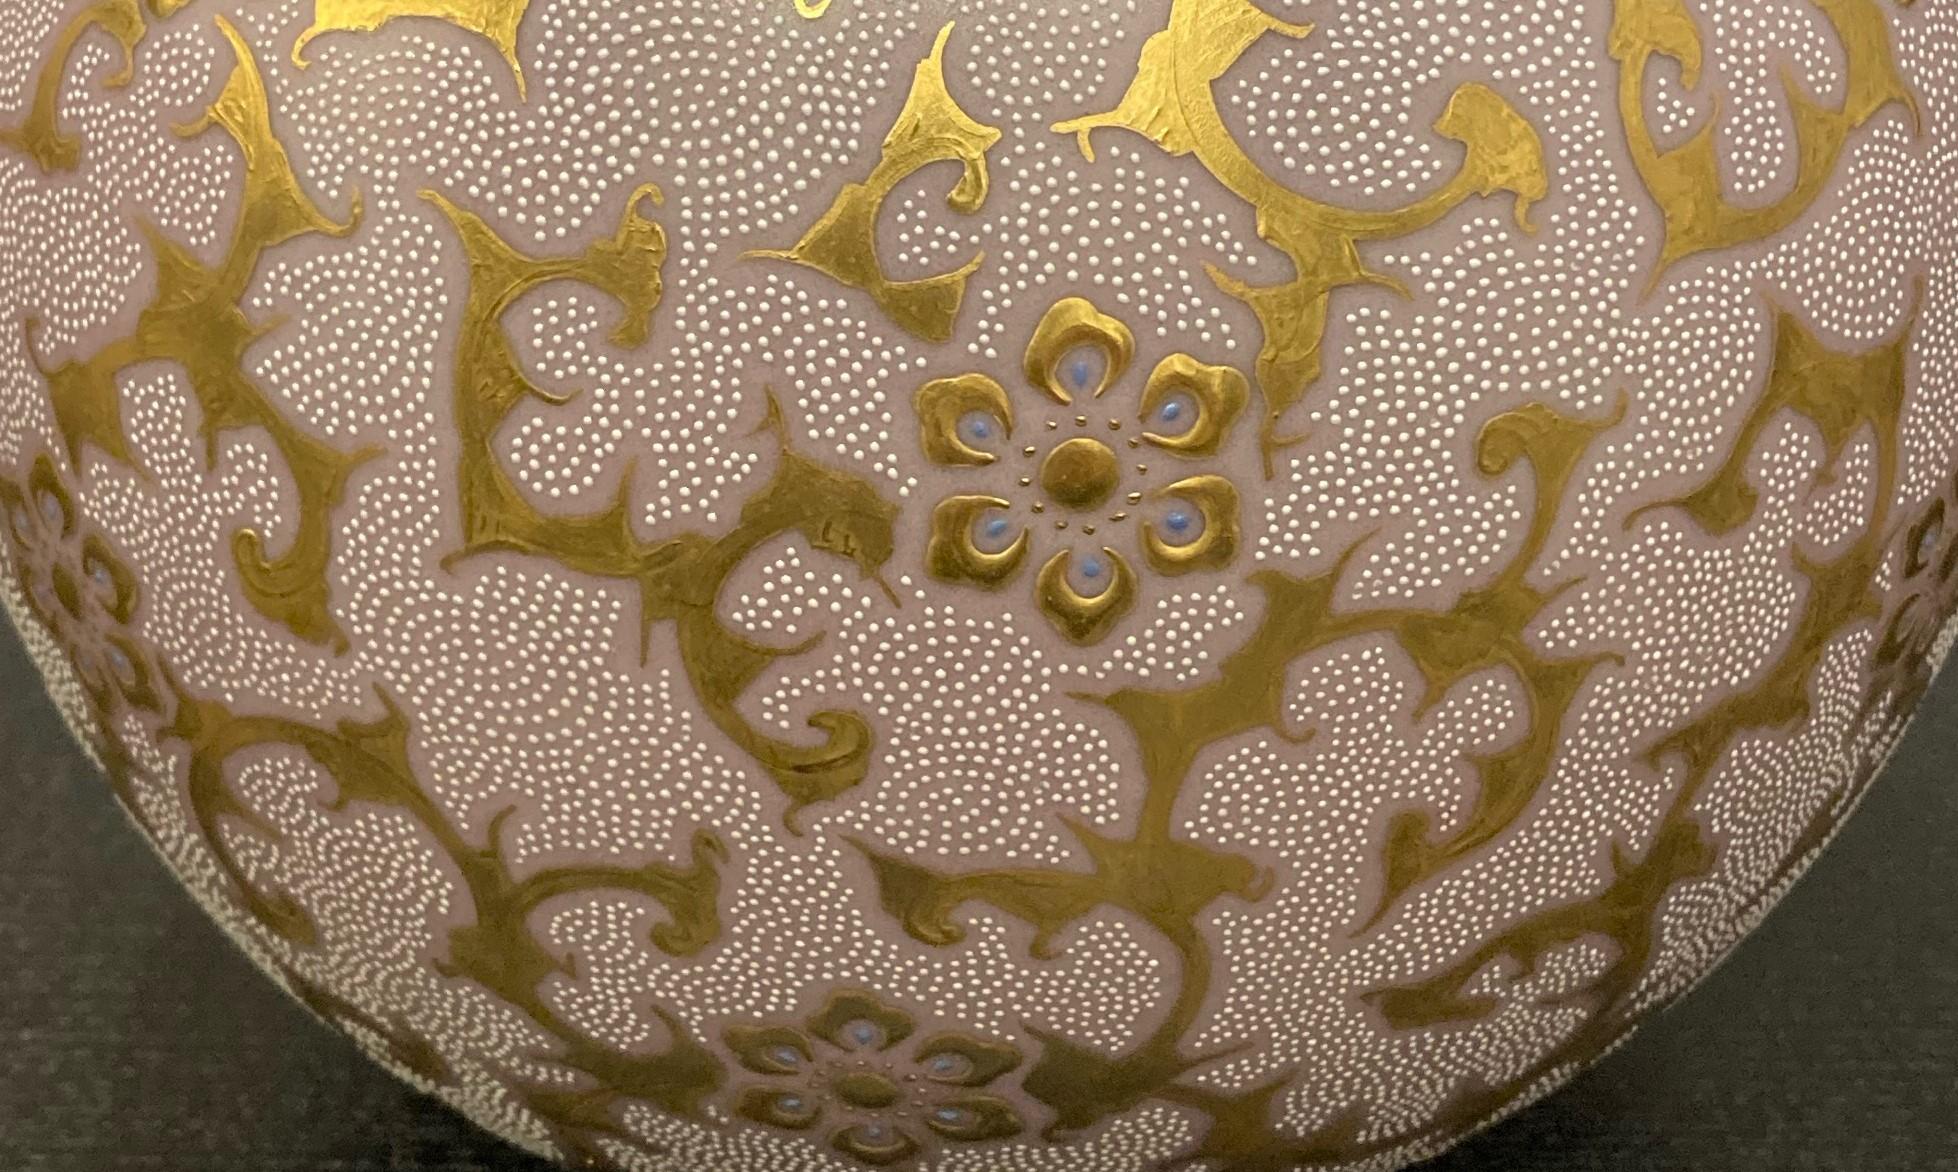 Exquisite contemporary Japanese museum quality signed Kutani porcelain vase, intricately hand painted with unique white raised 